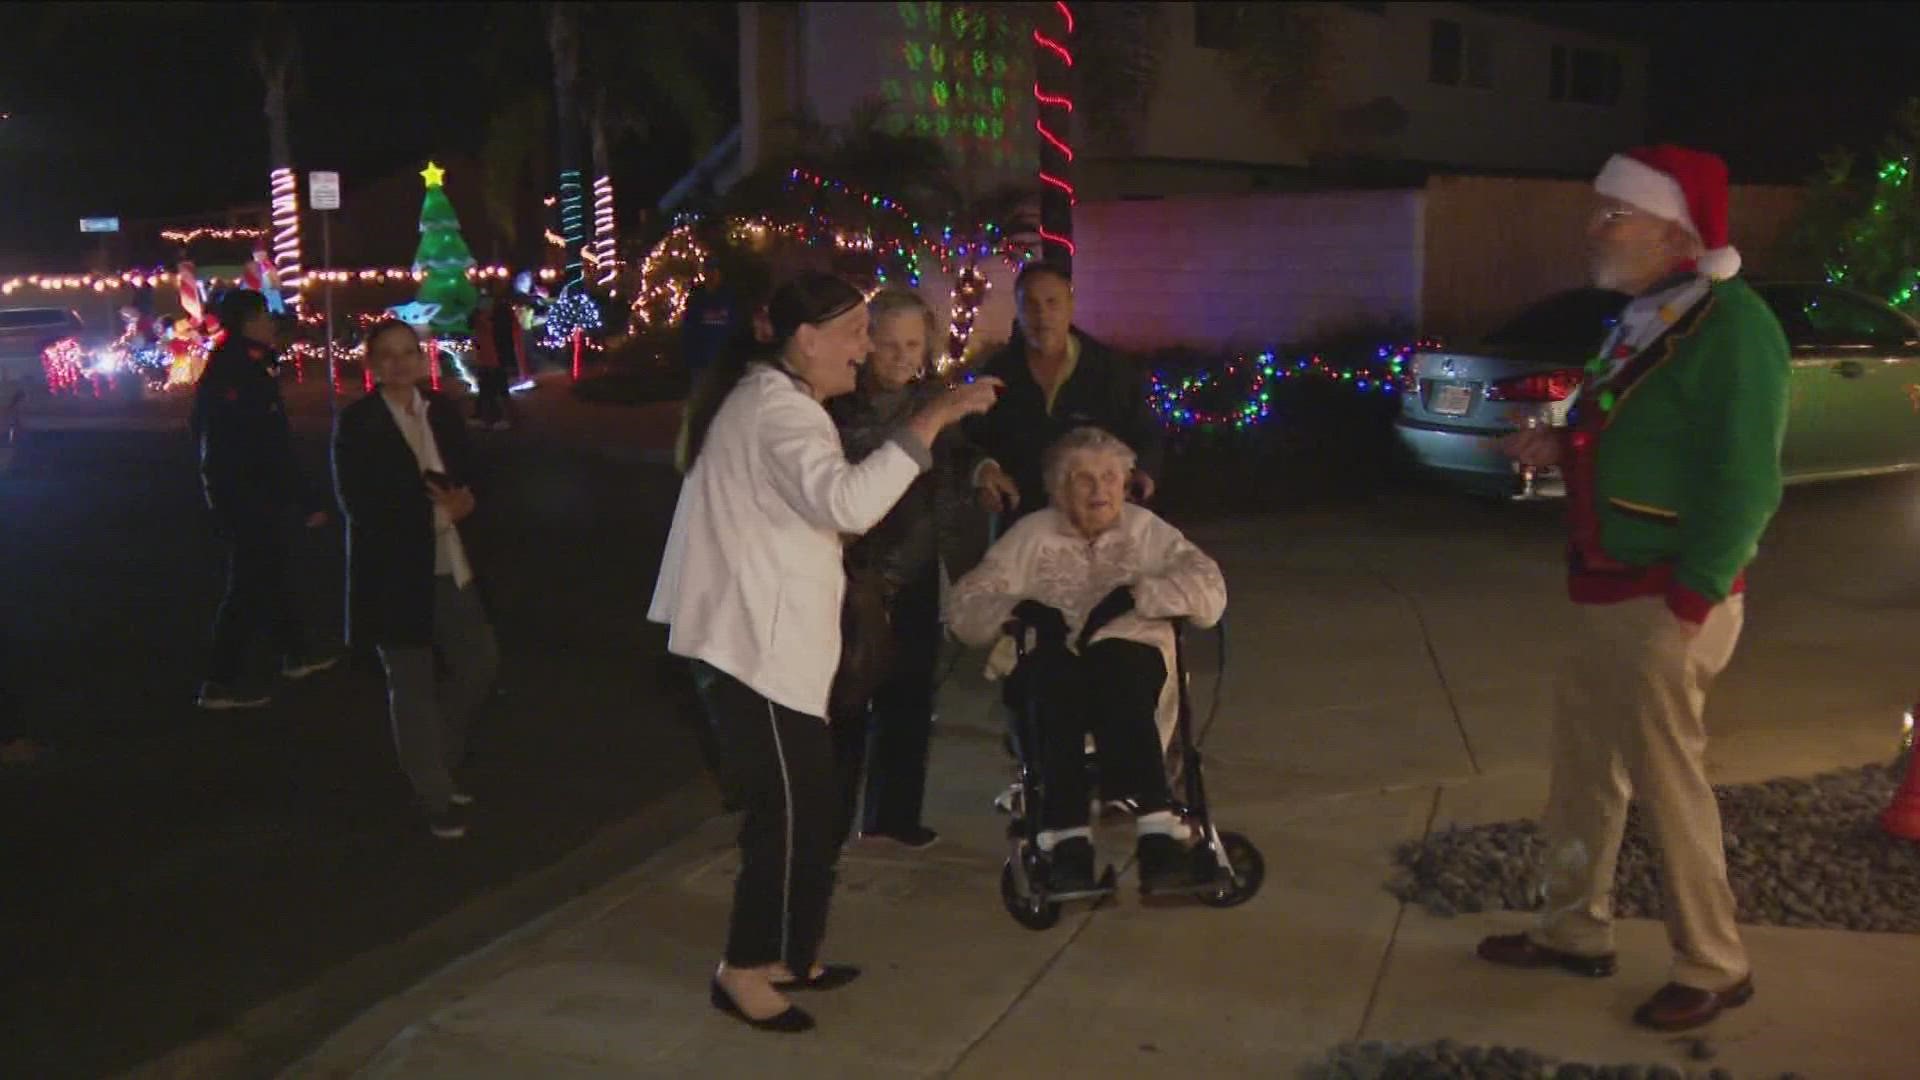 Christmas lights are lighting up neighborhoods around San Diego, but one neighborhood in Clairemont on Lana Drive shines bright during the holidays.